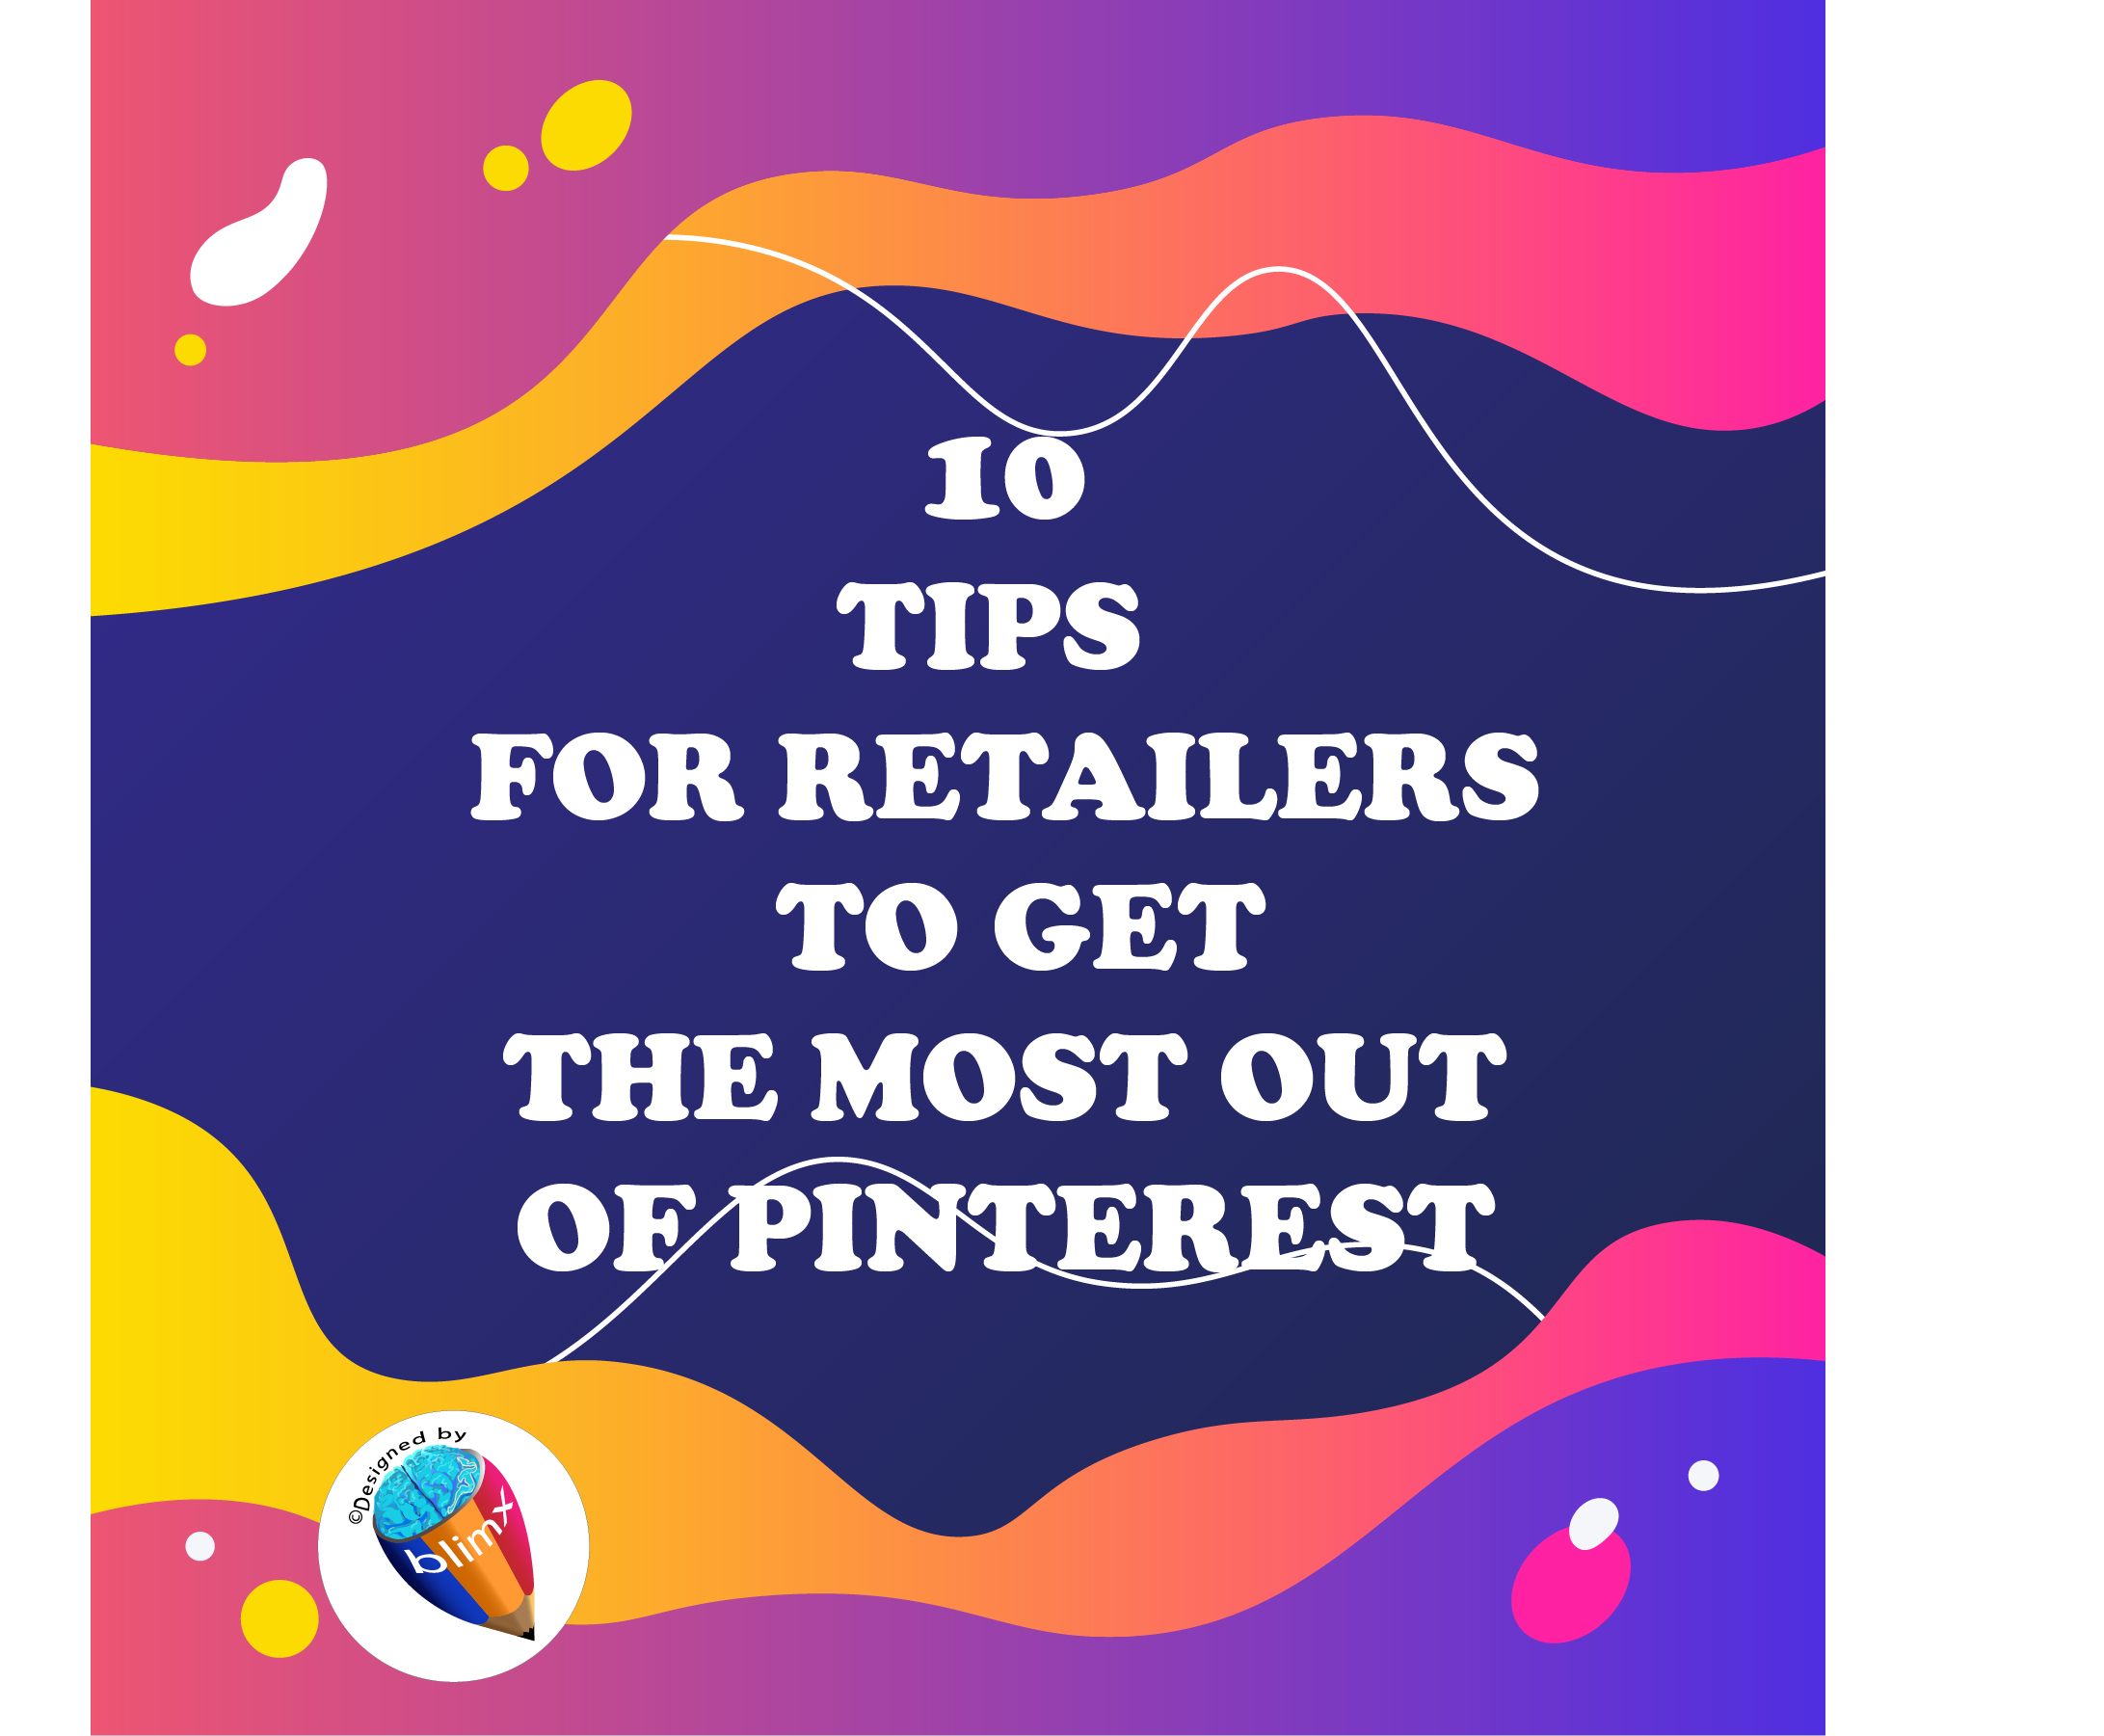 10 Tips for Retailers to Get the Most Out of Pinterest